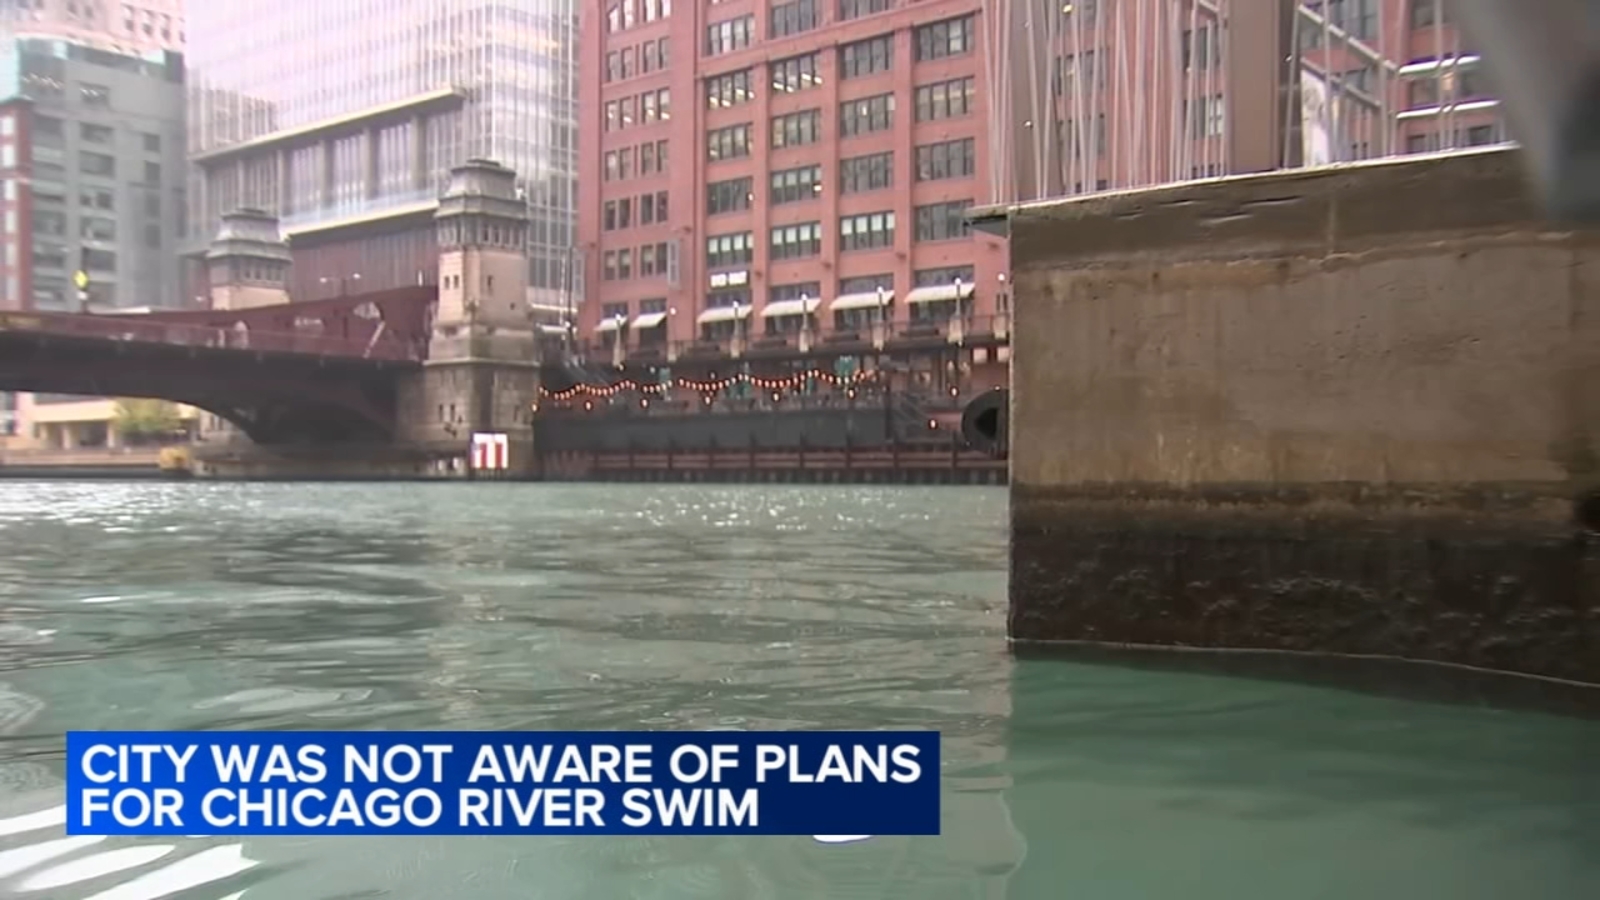 Chicago River swim planned for September 22 not actually approved by city, City Council still considering special permits [Video]